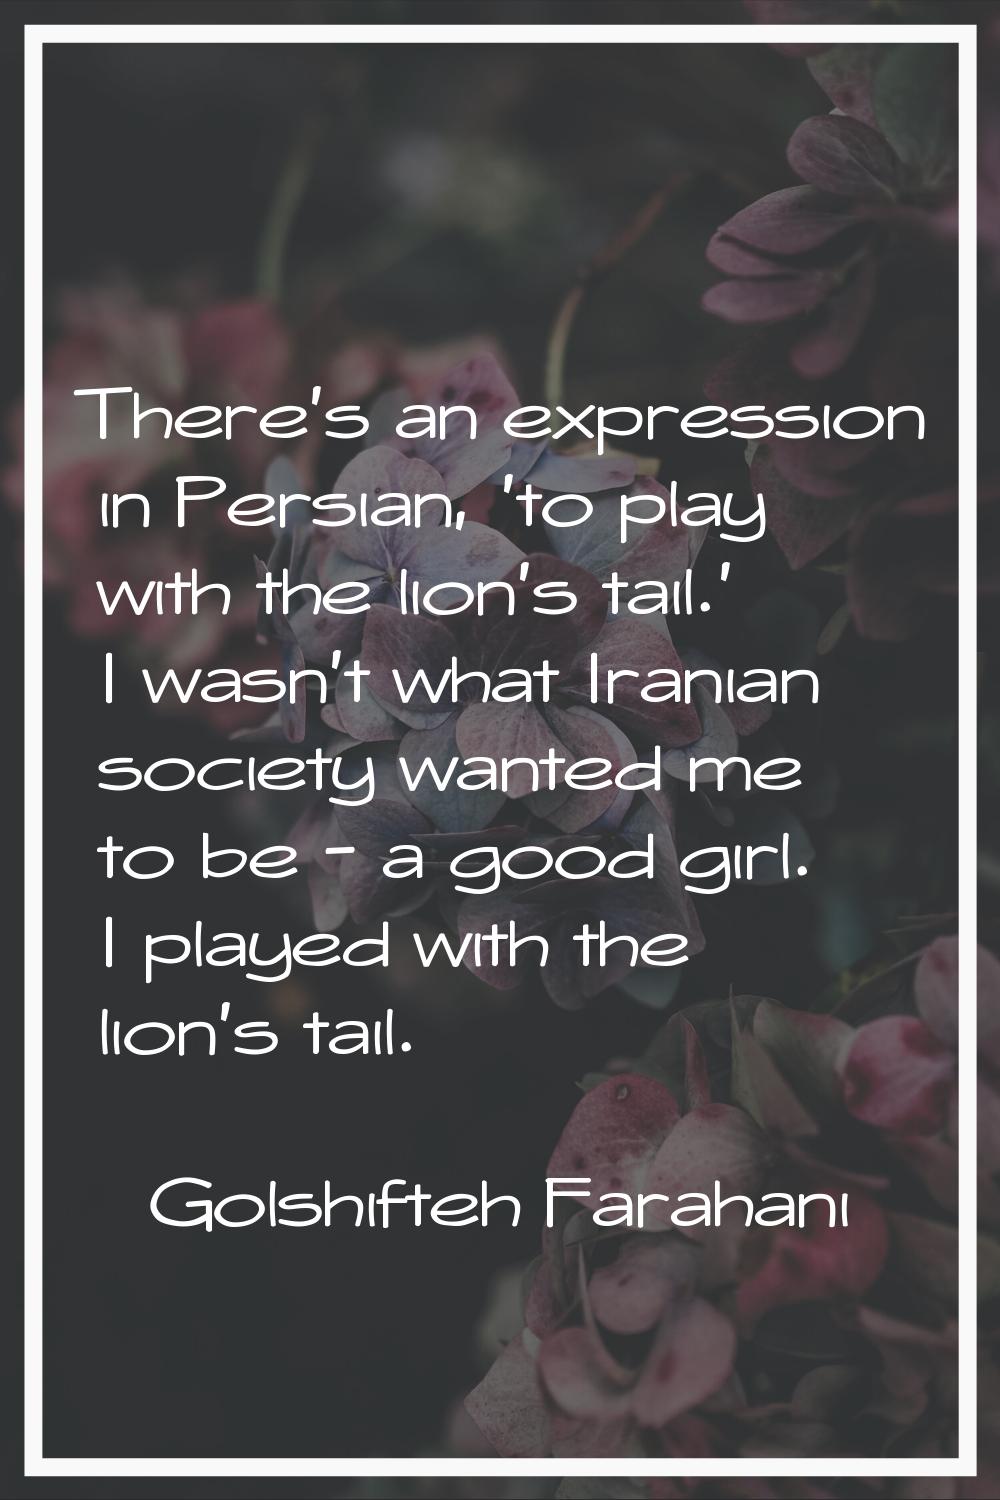 There's an expression in Persian, 'to play with the lion's tail.' I wasn't what Iranian society wan